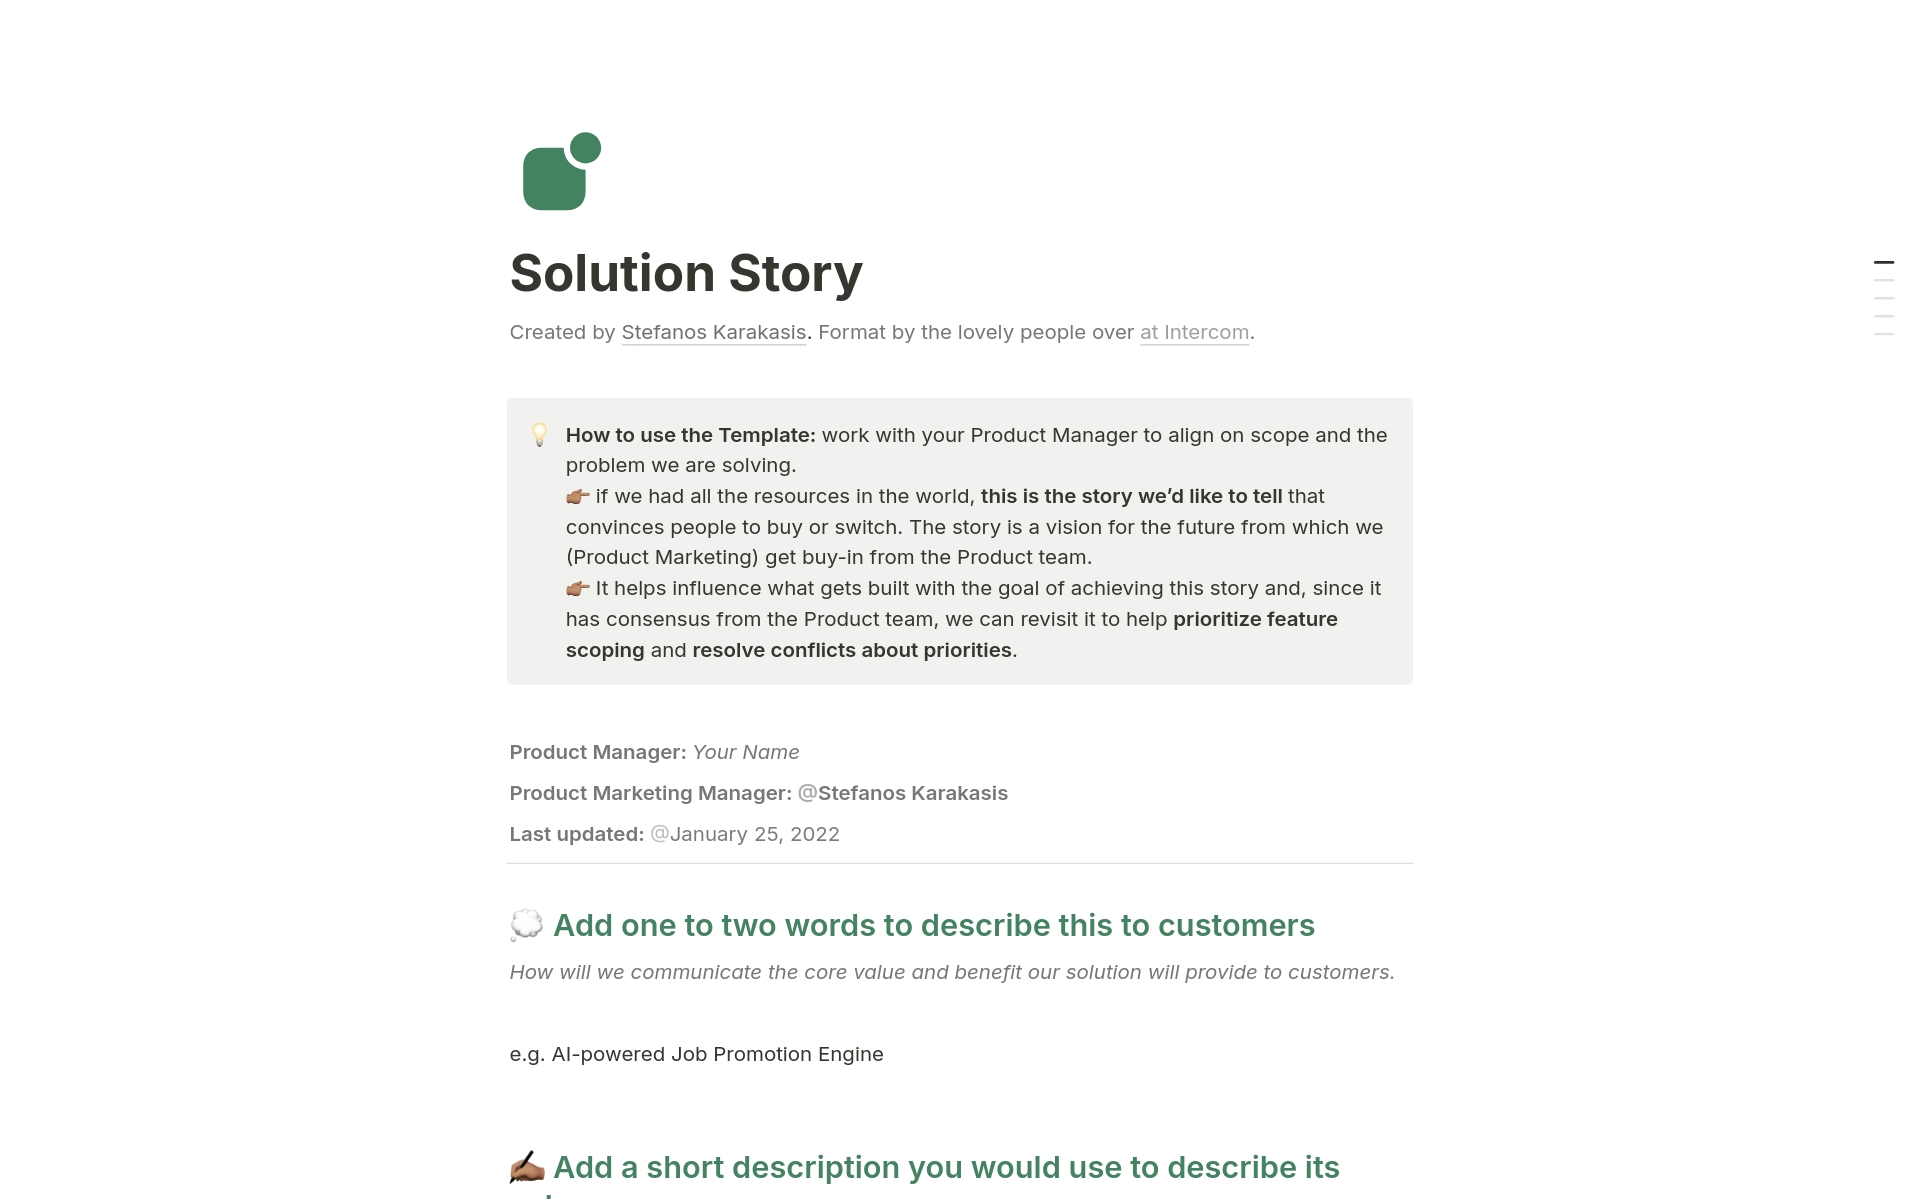 Mallin esikatselu nimelle Solution Story: One-Page Product Messaging Brief